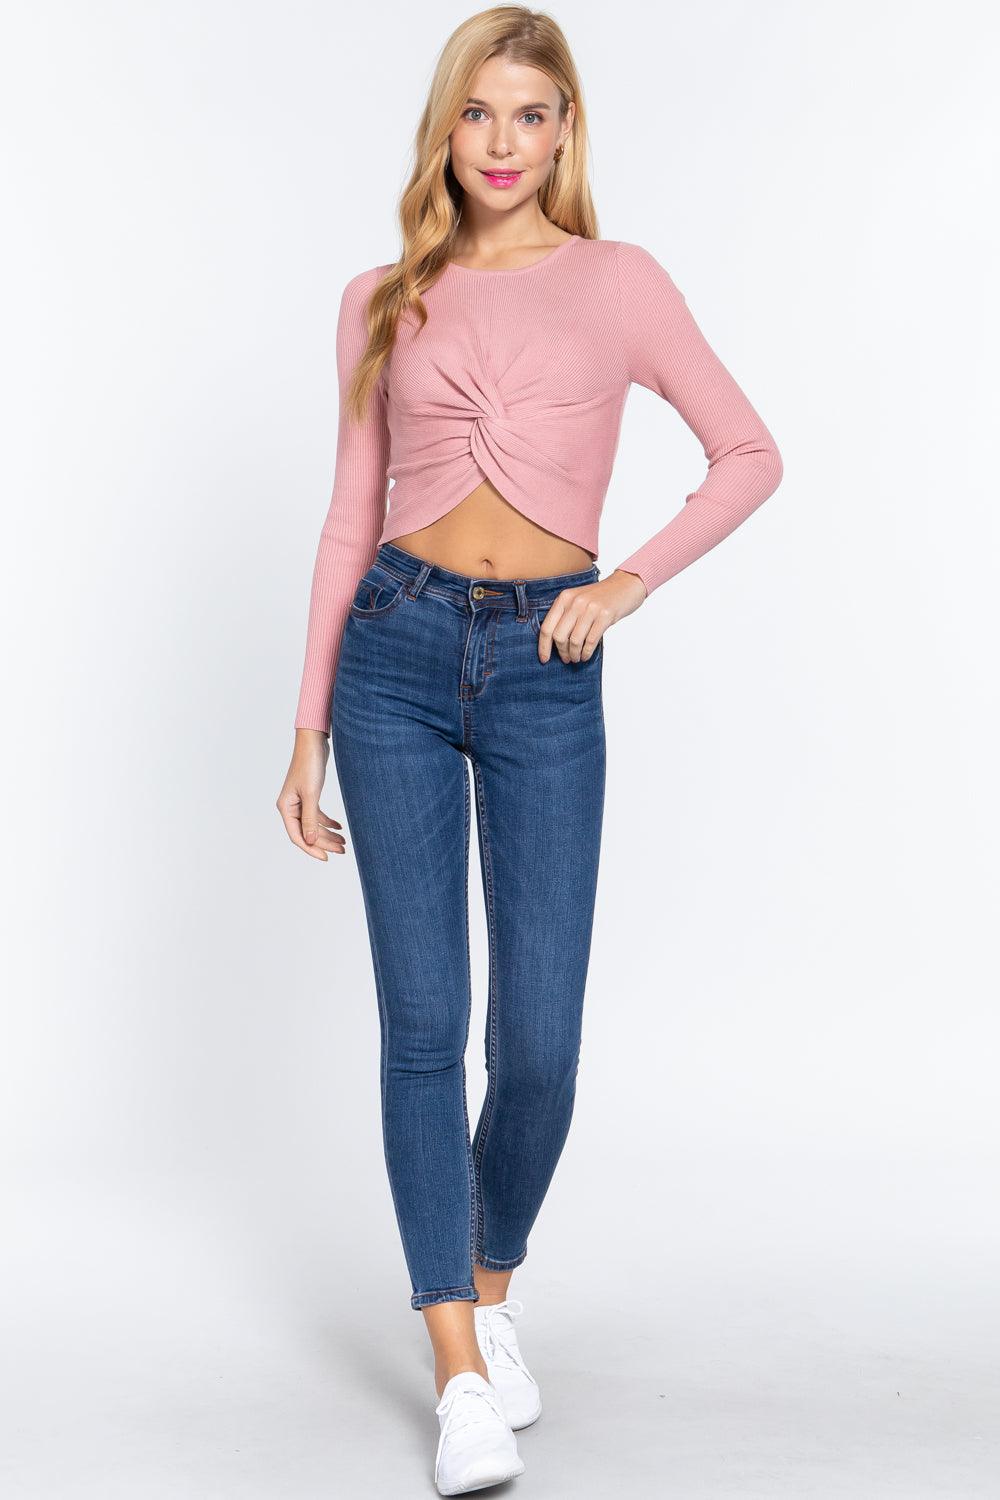 Crew Neck Knotted Crop Sweater Naughty Smile Fashion